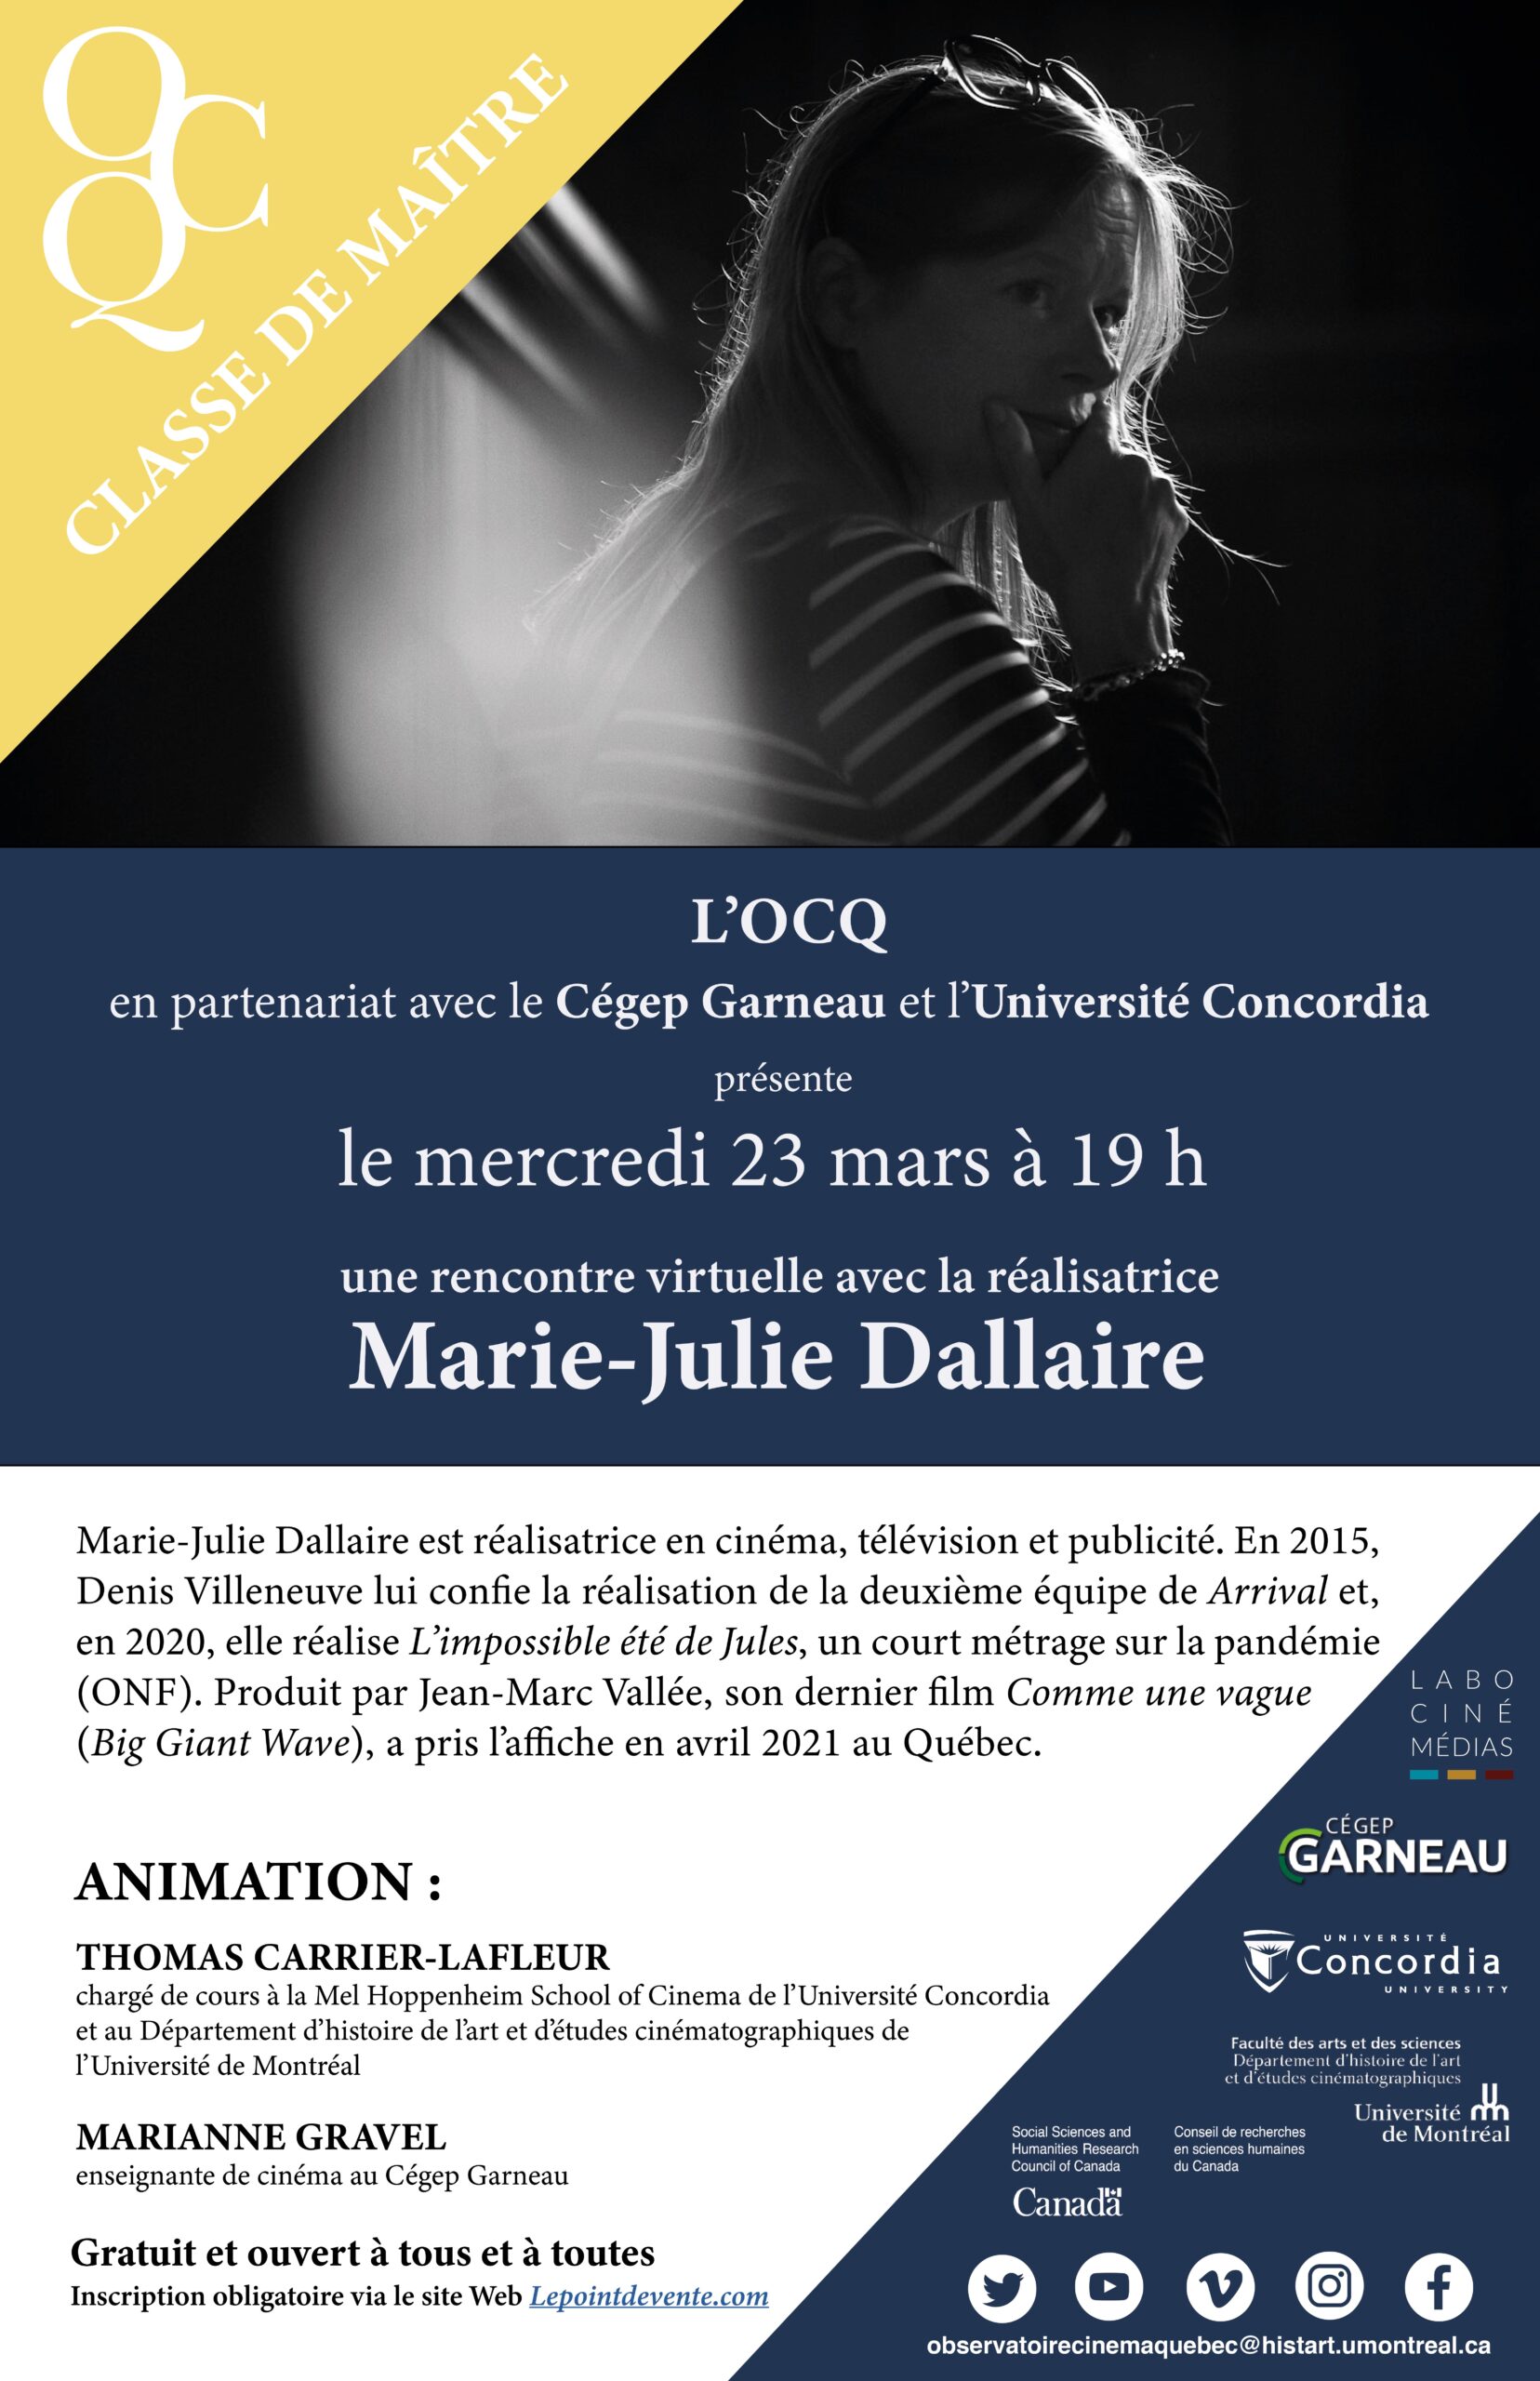 You are currently viewing 23/03/2022 - Une rencontre virtuelle avec Marie-Julie Dallaire